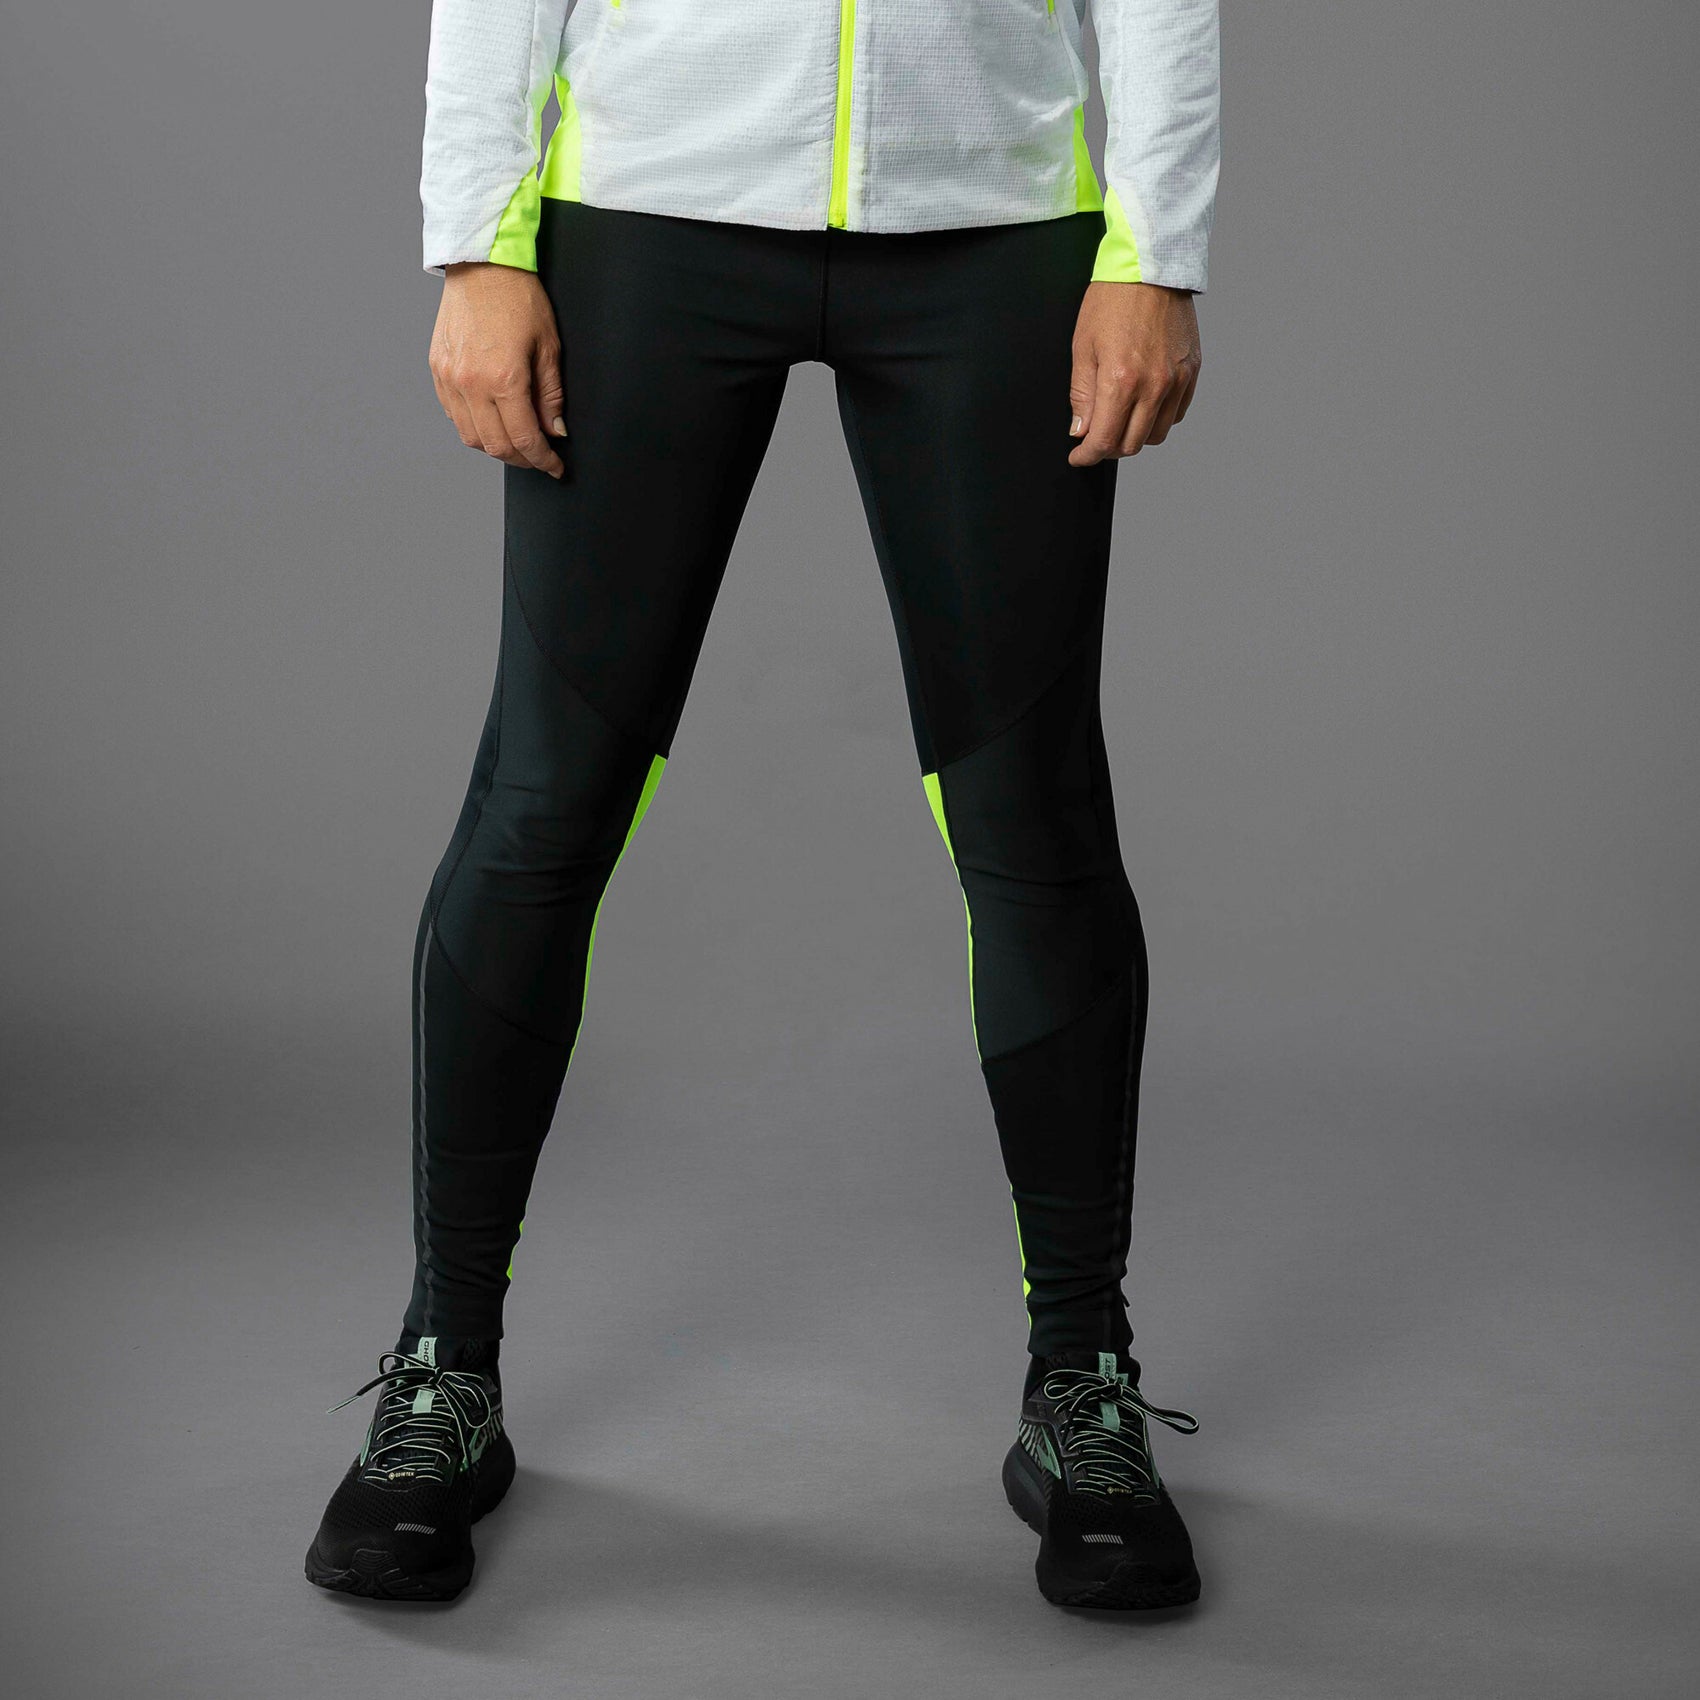  GORE WEAR Women's Running Tights, R5, GORE-TEX INFINIUM, XS,  Black : Clothing, Shoes & Jewelry